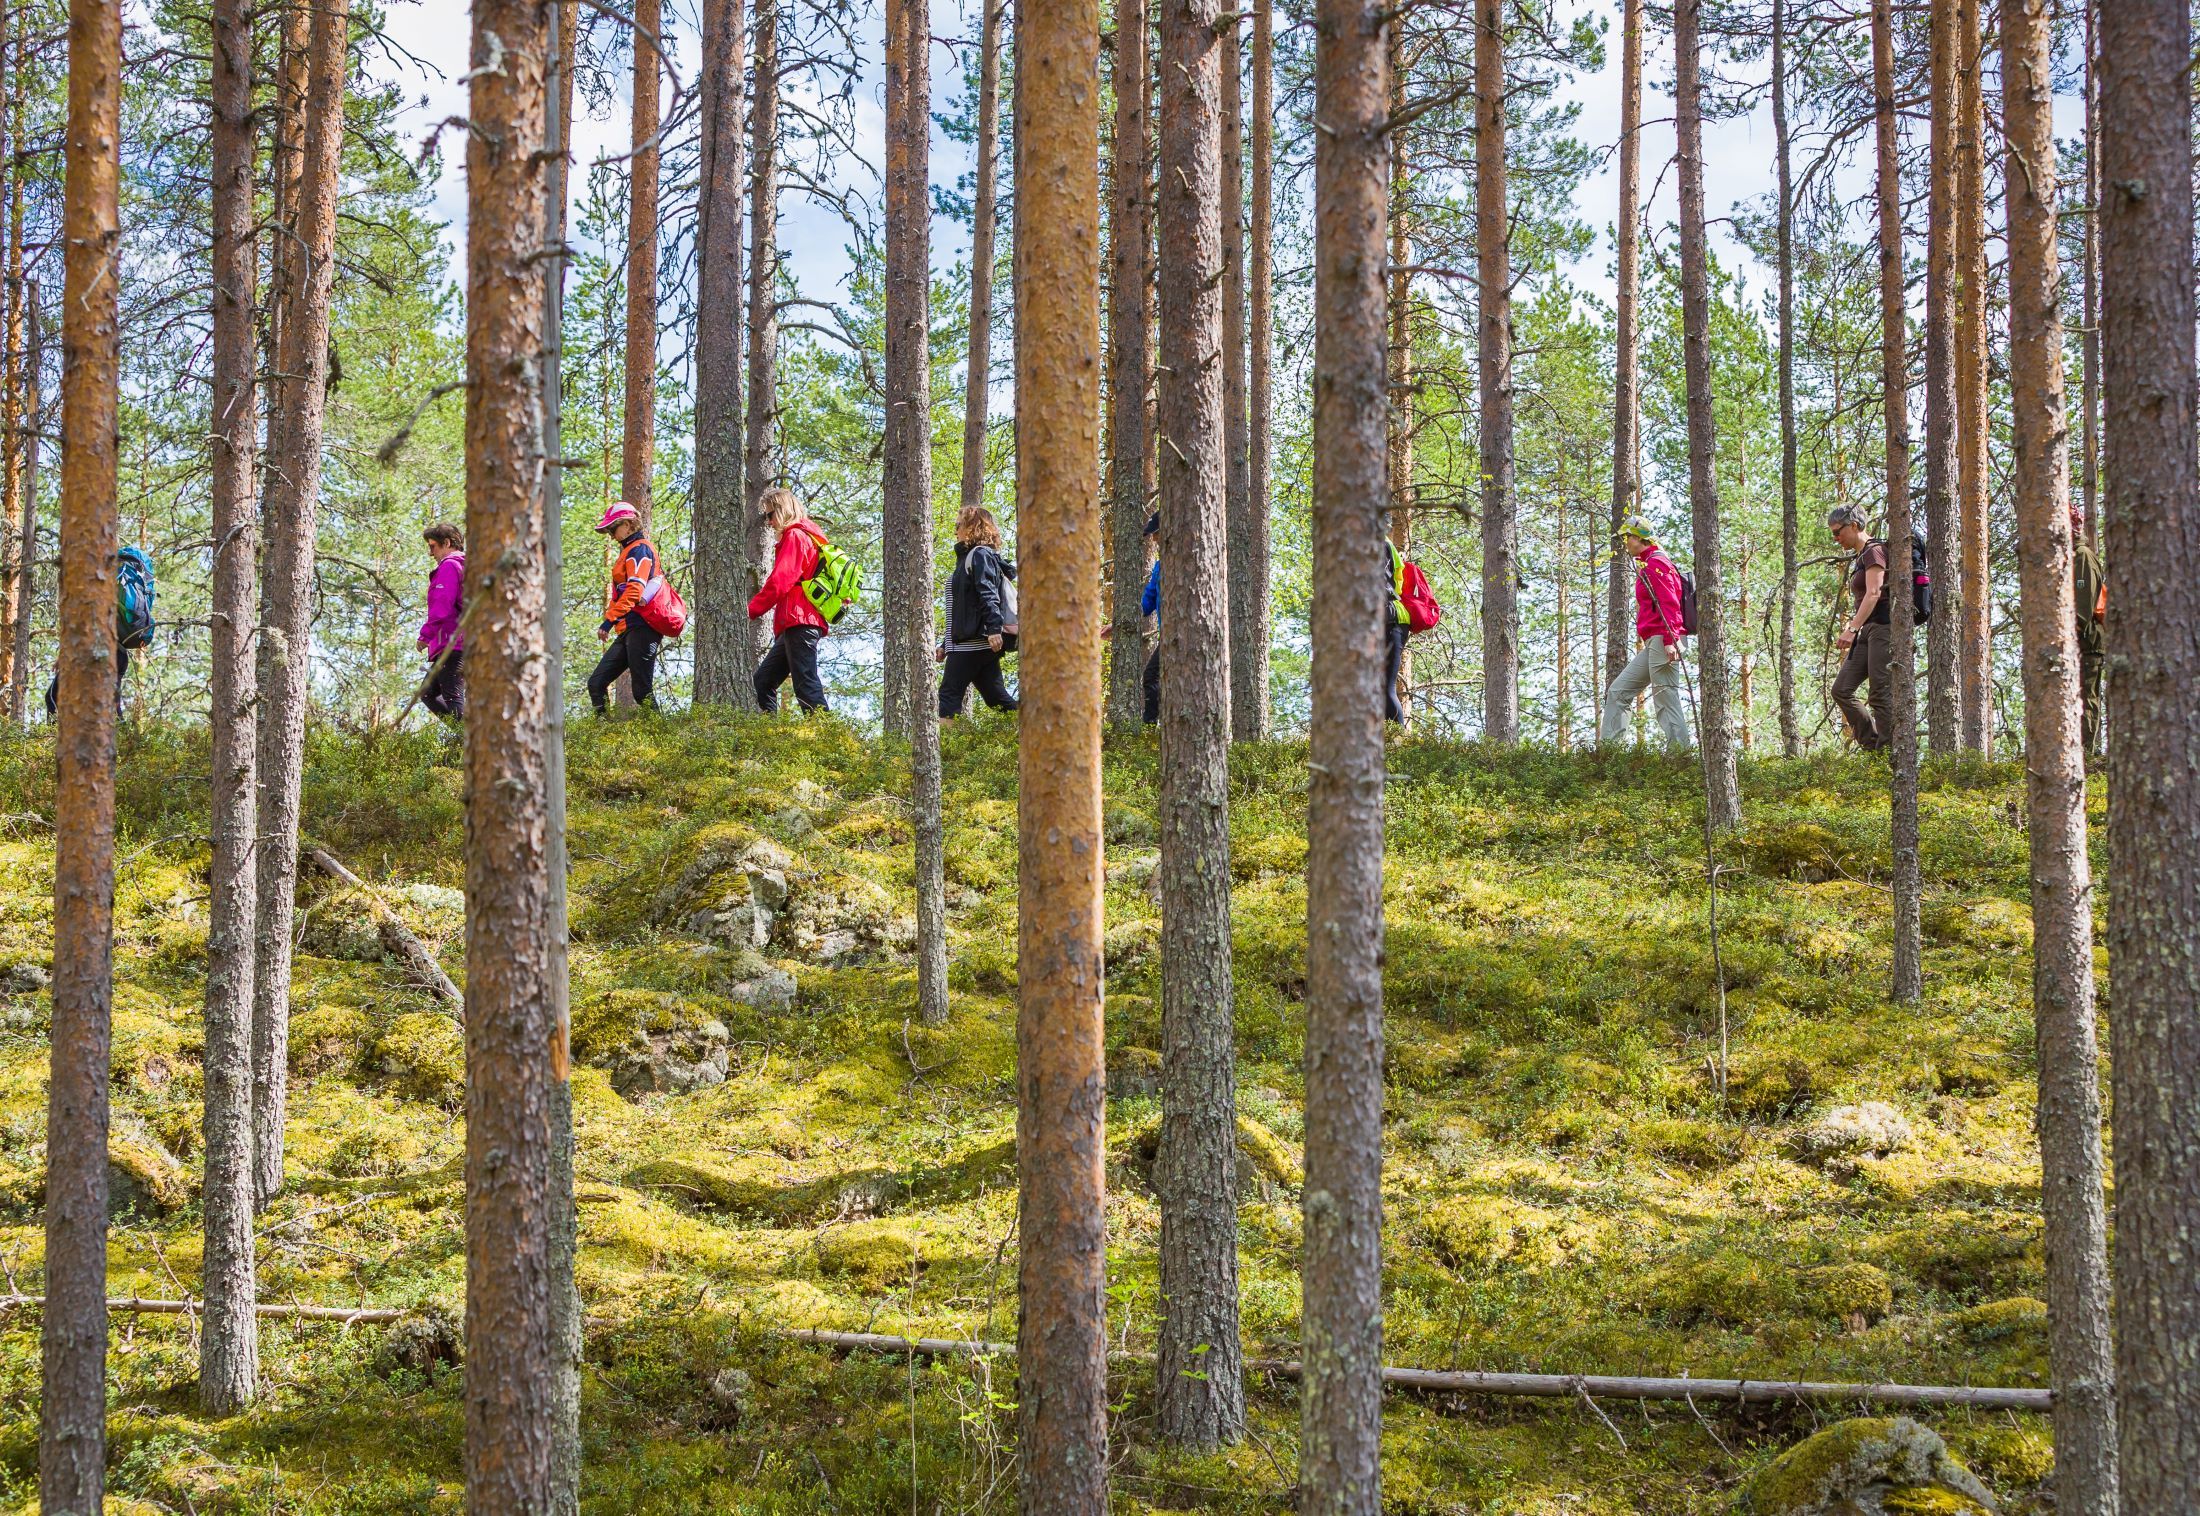 A queue of hikers walking through a pine forest. 